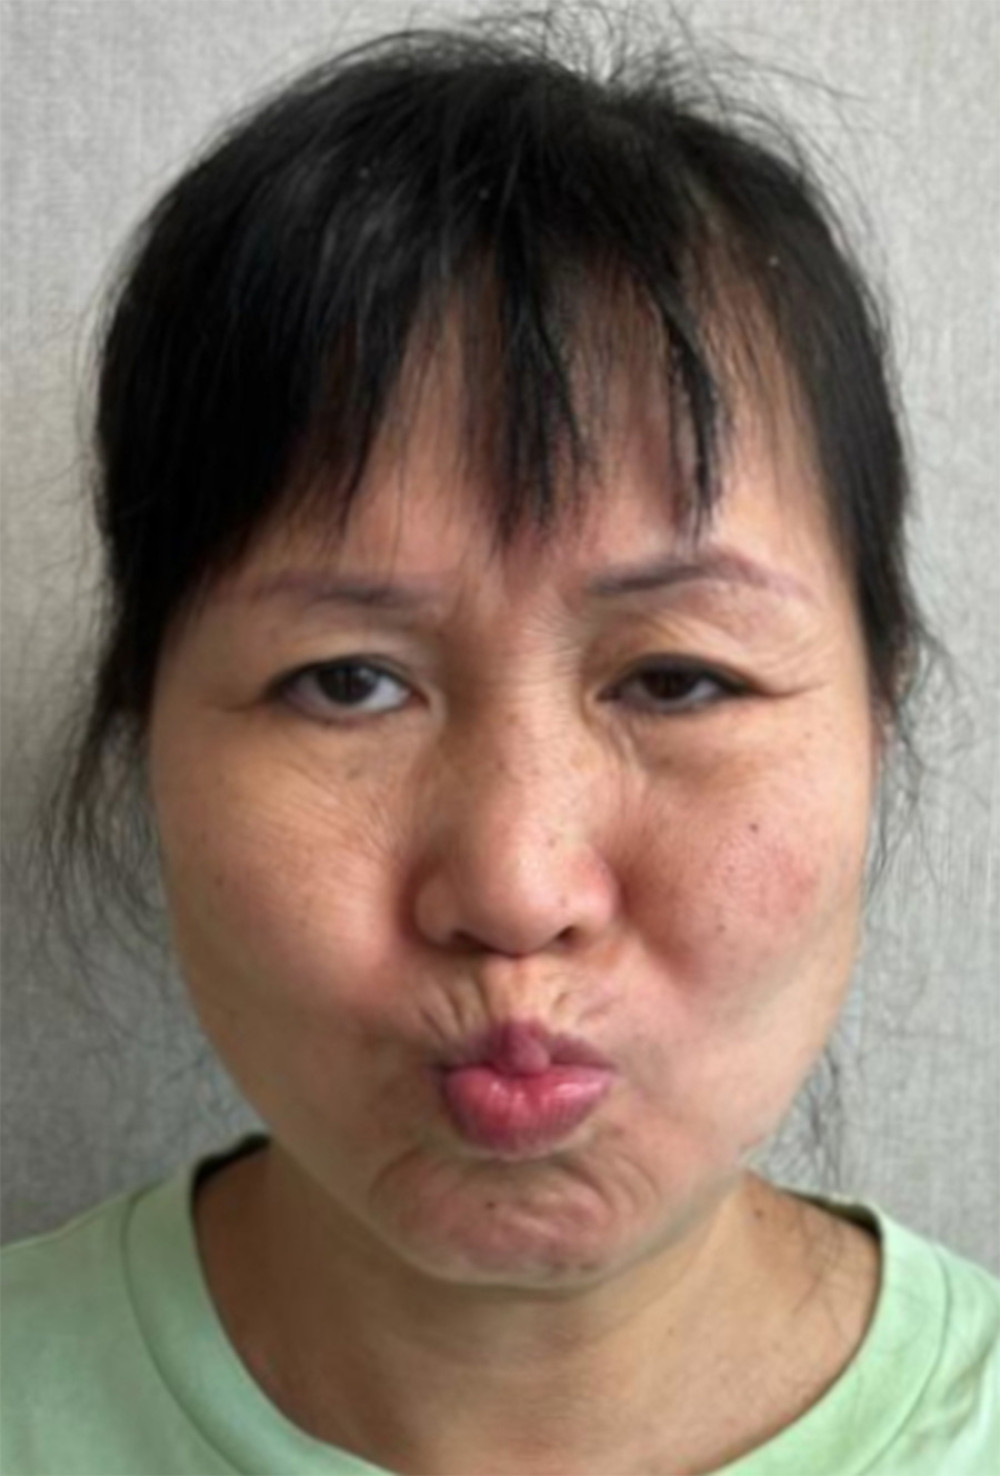 Facial expression at 1-month follow-up. The patient was asked to pucker her lips, which is one of the assessments for facial expressions in patients with Bell’s palsy. While she initially struggled to perform this task, she was now able to do it easily. However, residual synkinesis is evident in the form of a left eyelid droop, which now only occurred when making facial expressions as opposed to also occurring at rest. This image was taken by AC and was used with the patient’s written consent.